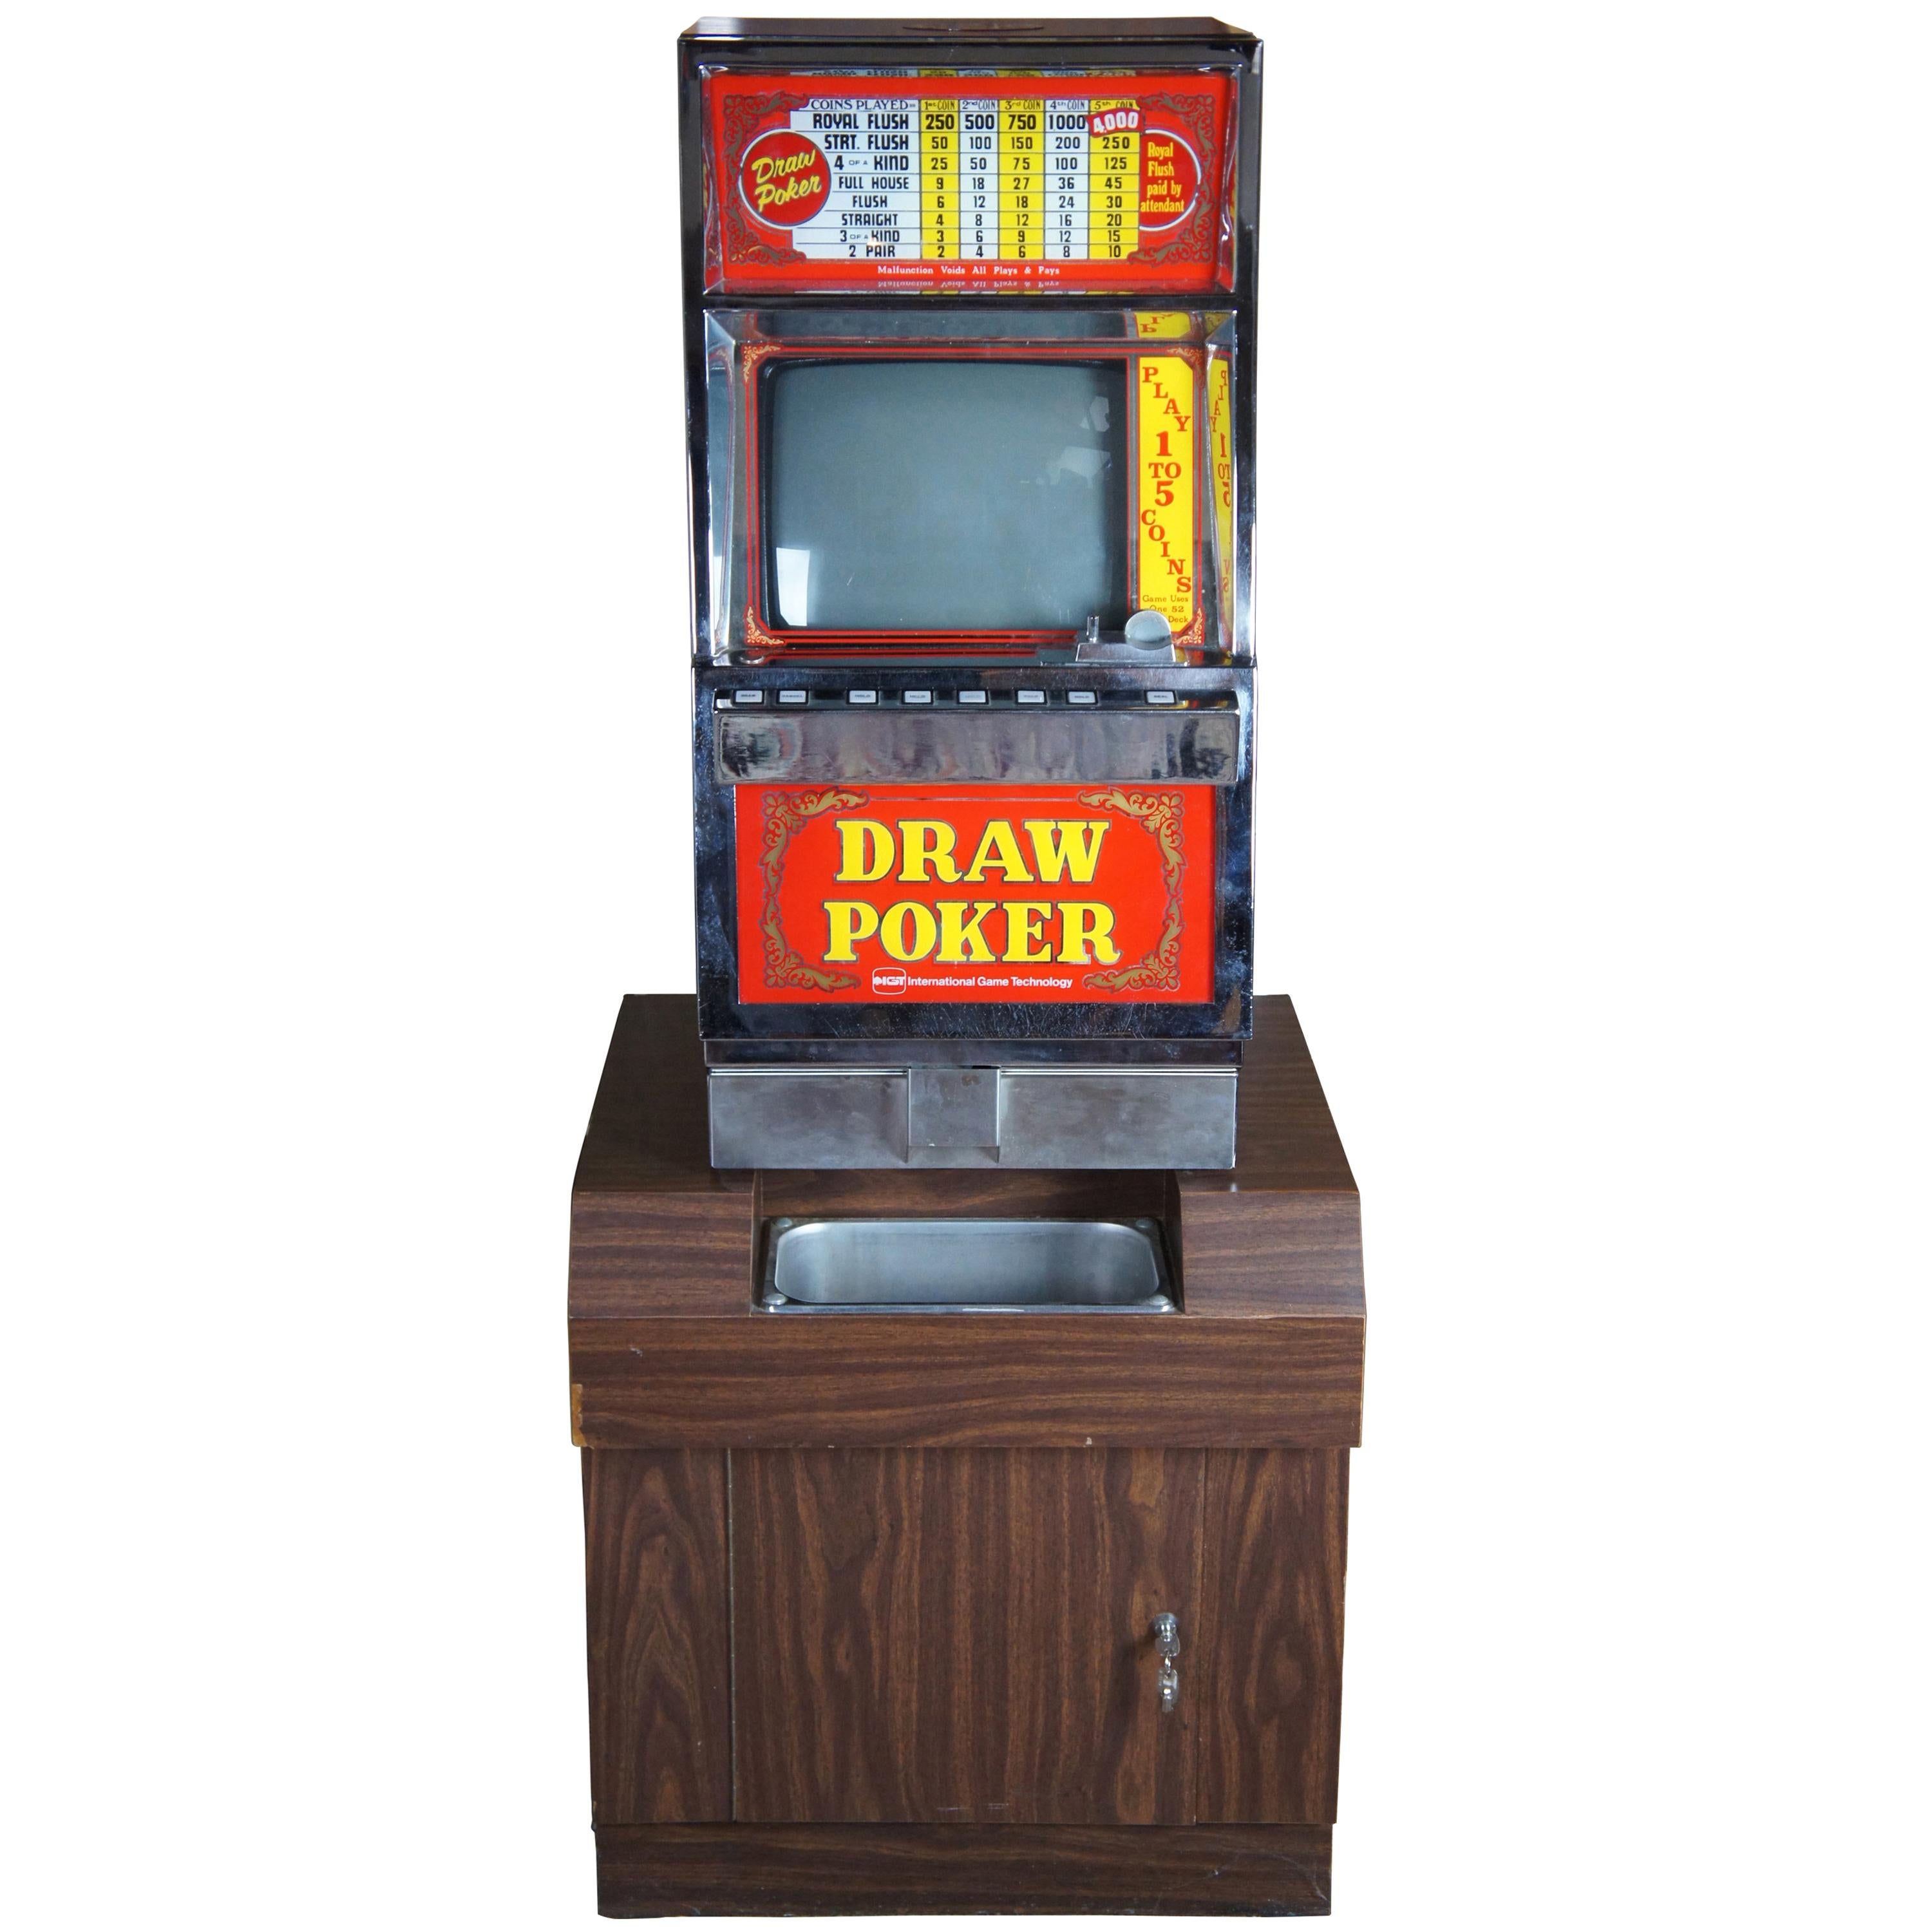 1982 IGT Draw Poker Coin Operated Slot Machine on Base